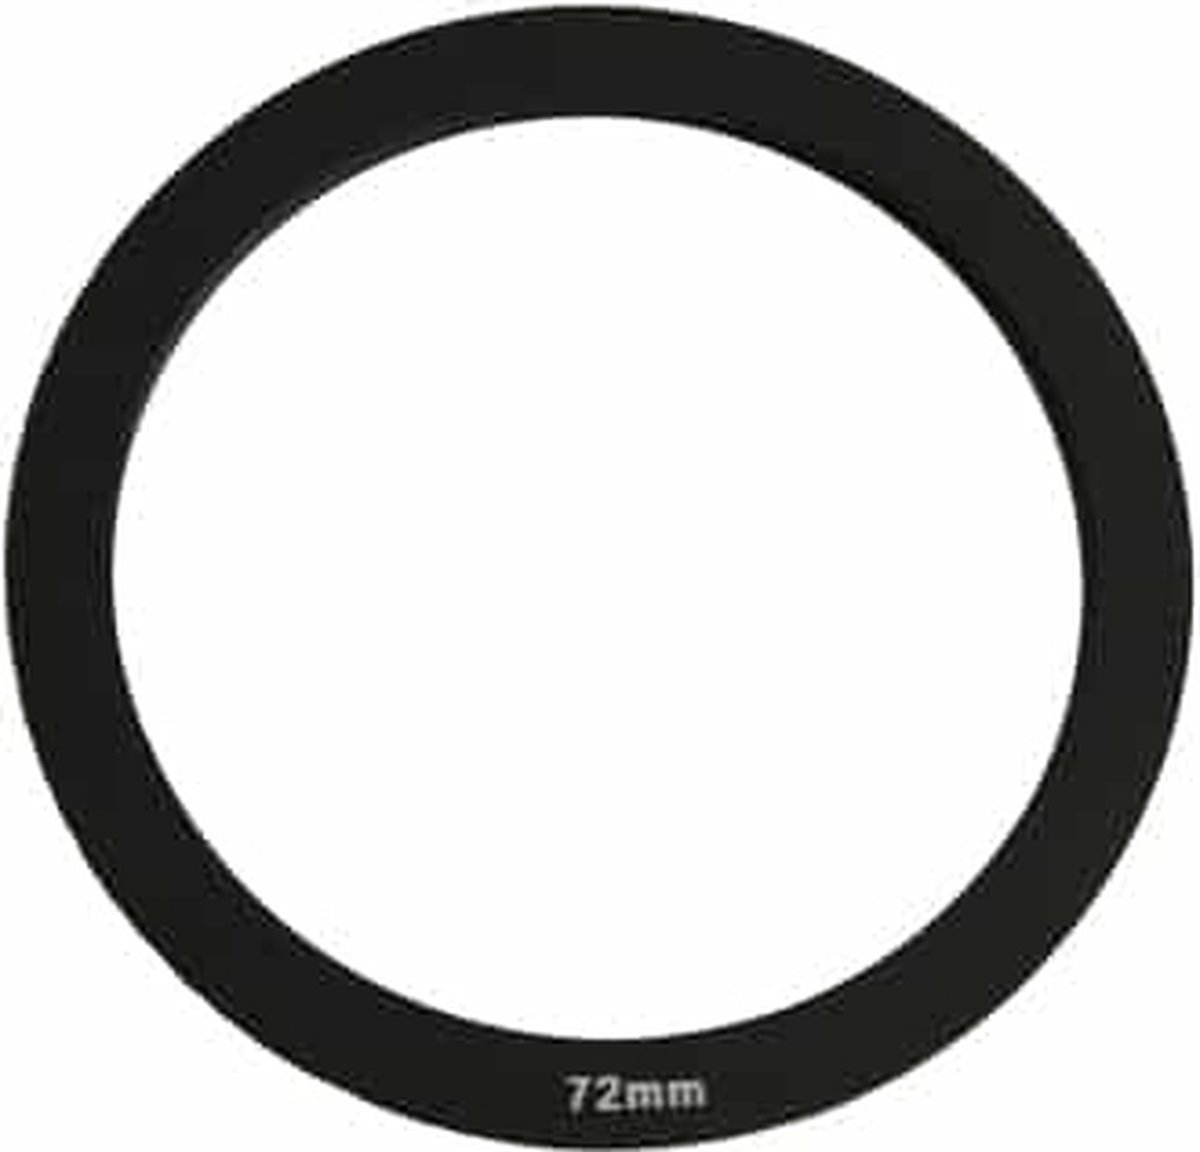 72mm square filter stepping ring